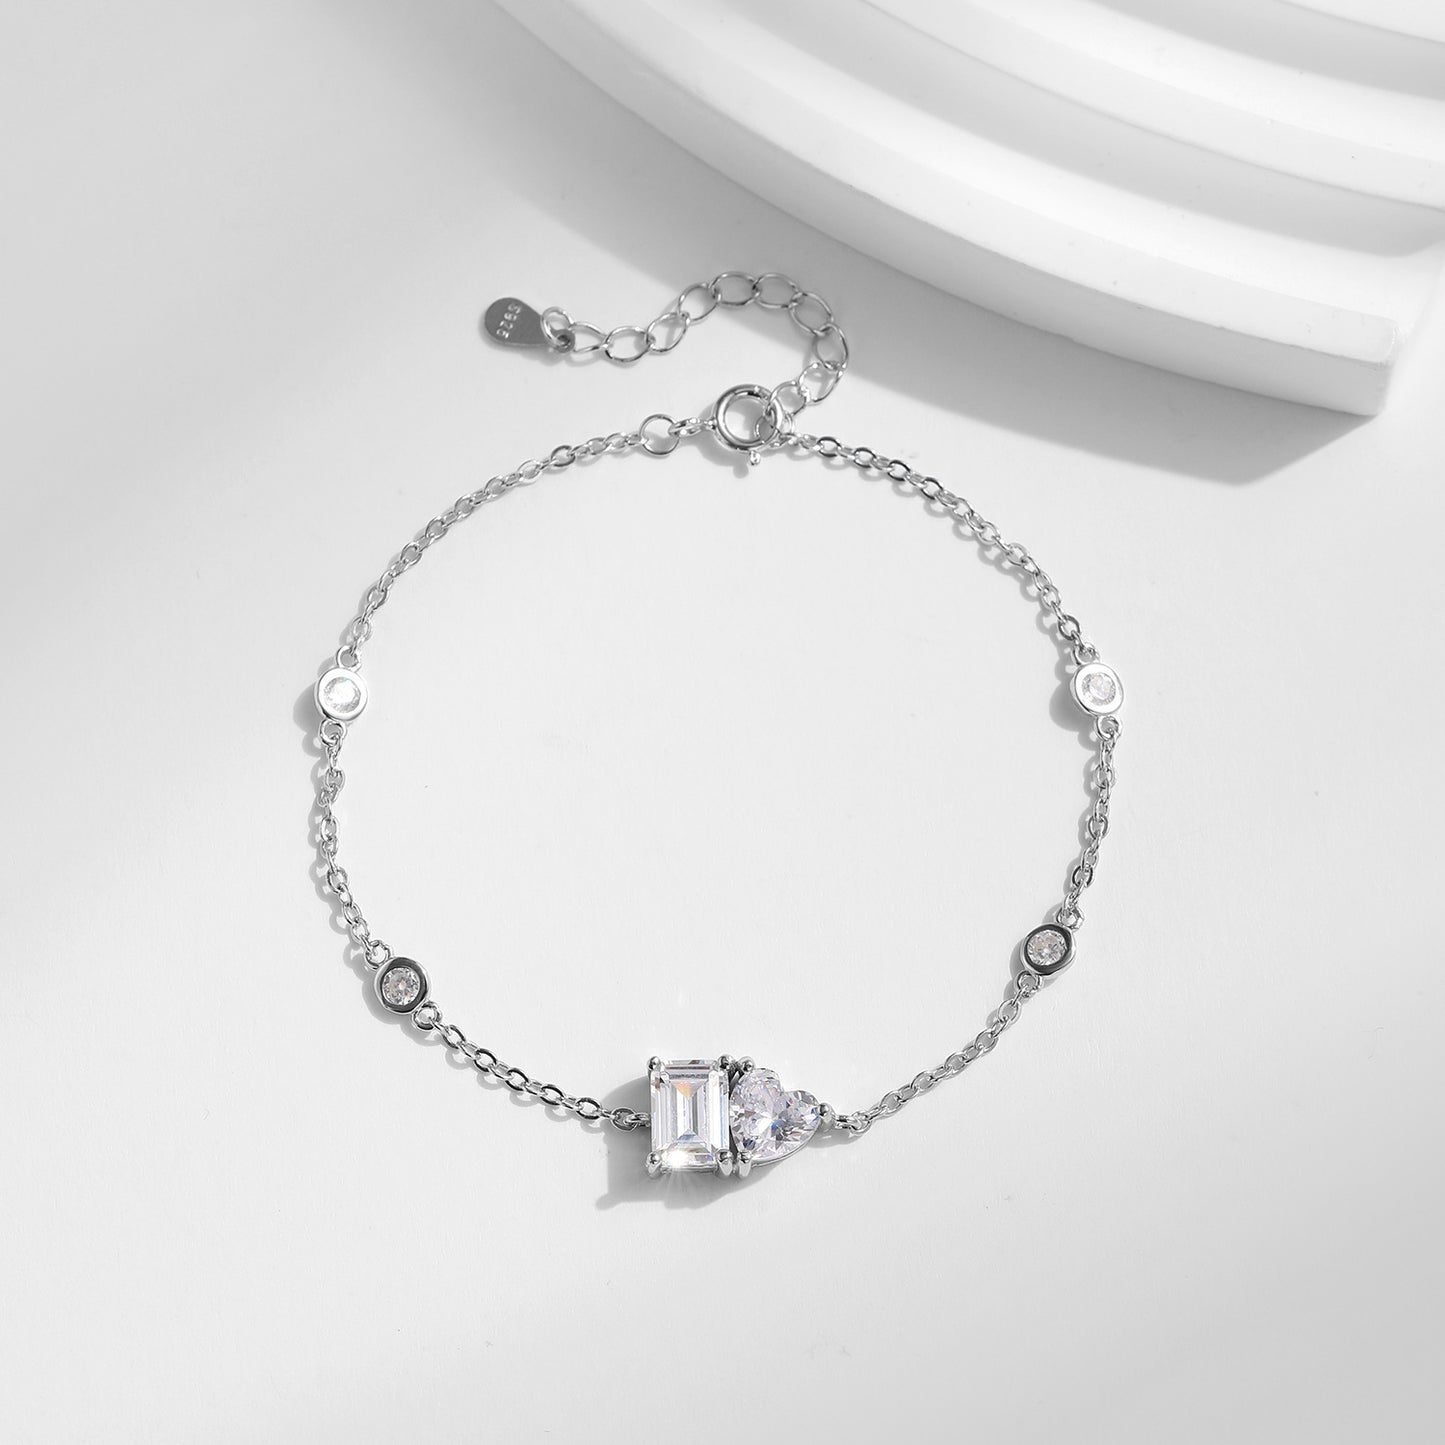 Luxurious Zircon Sterling Silver Bracelet for Women by Planderful Collection